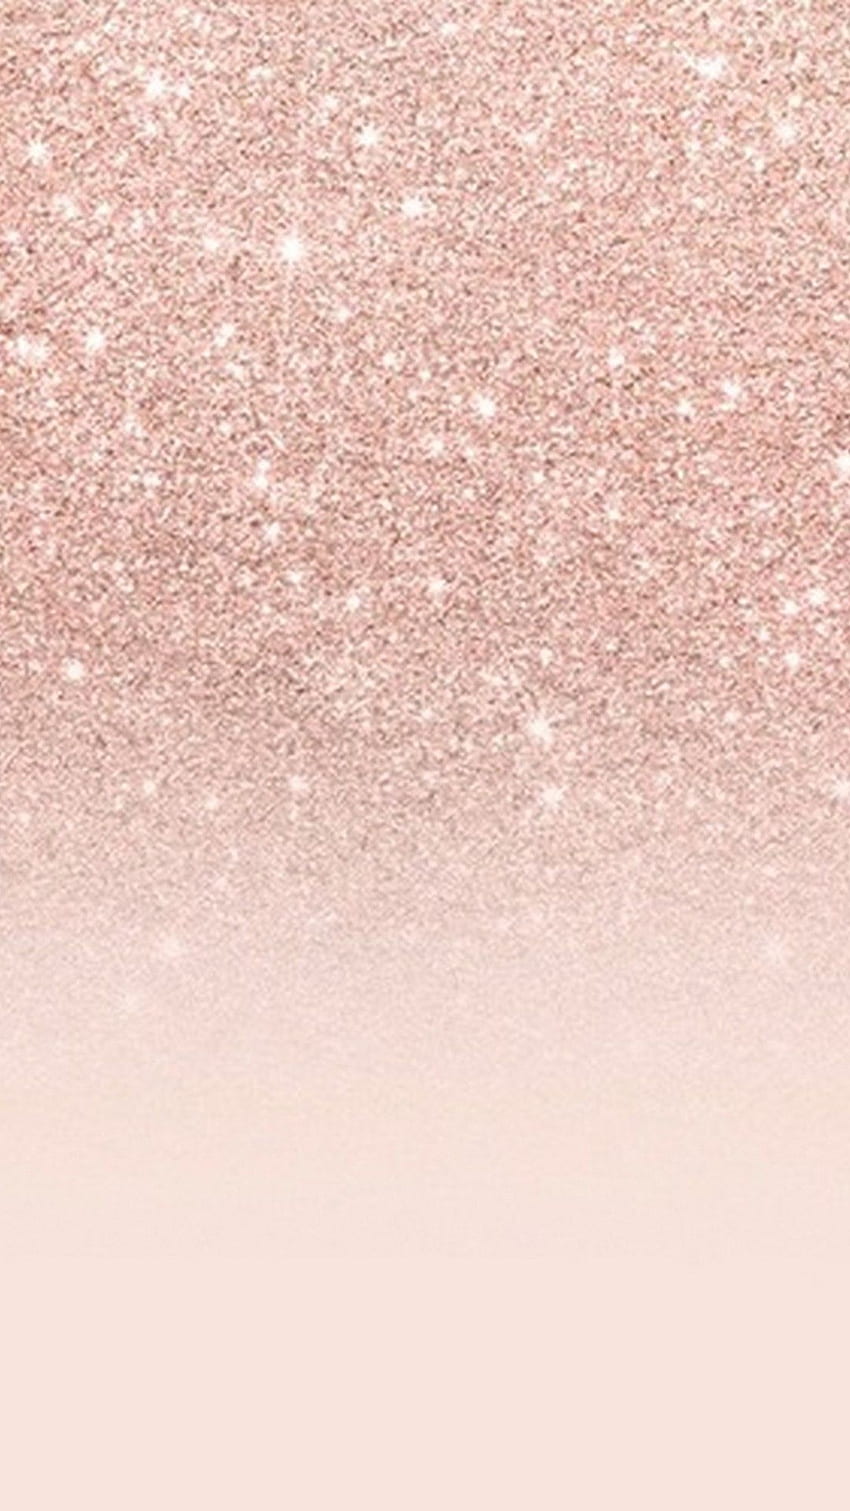 rose gold iphone background